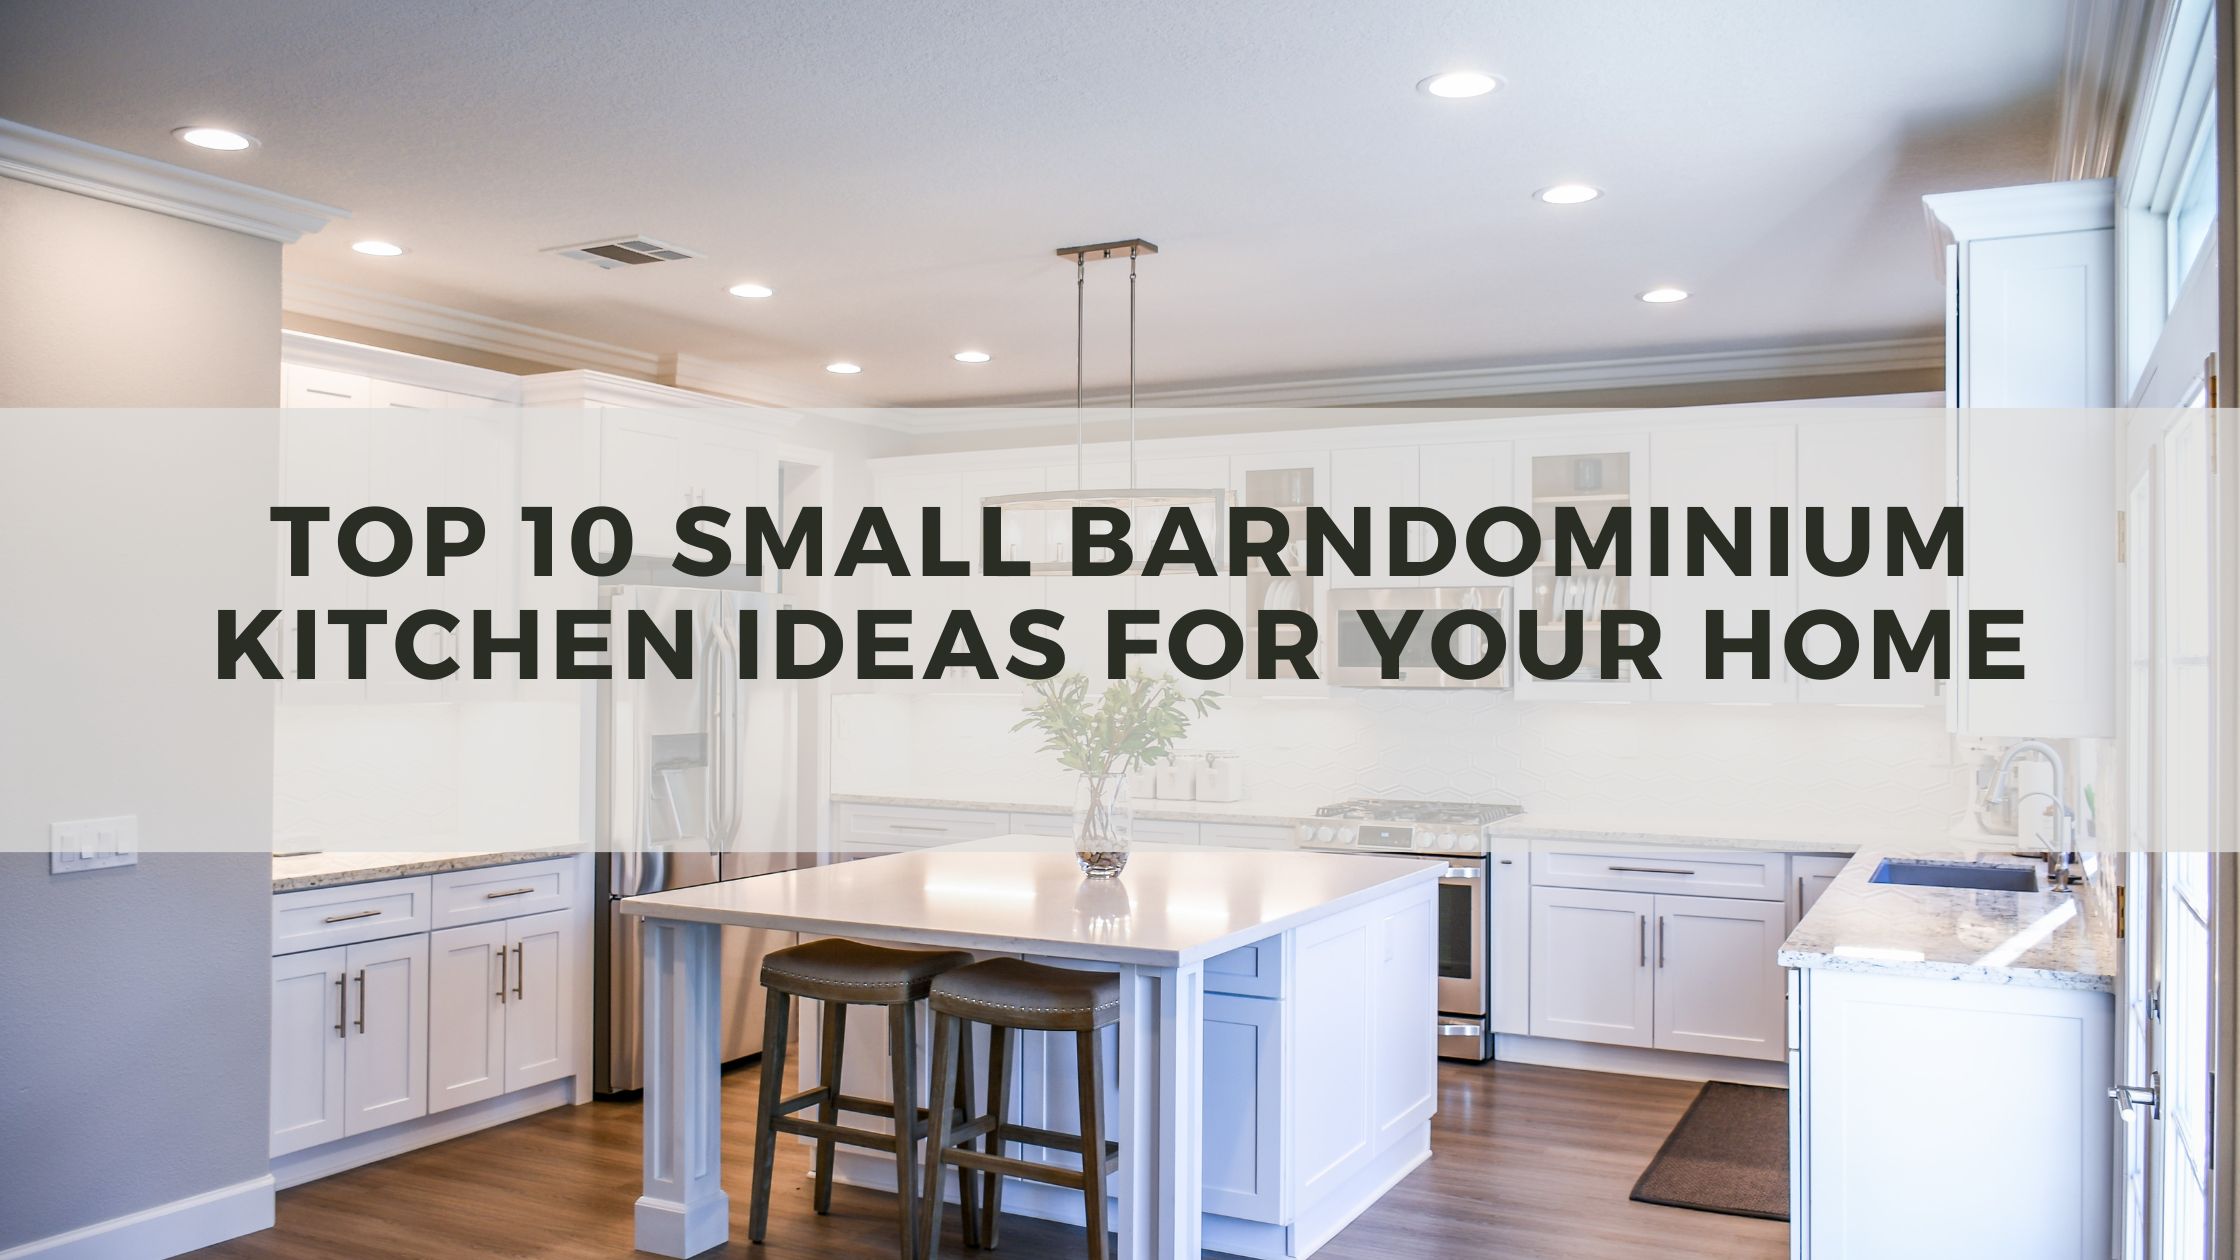 Top 10 Small Barndominium Kitchen Ideas For Your Home